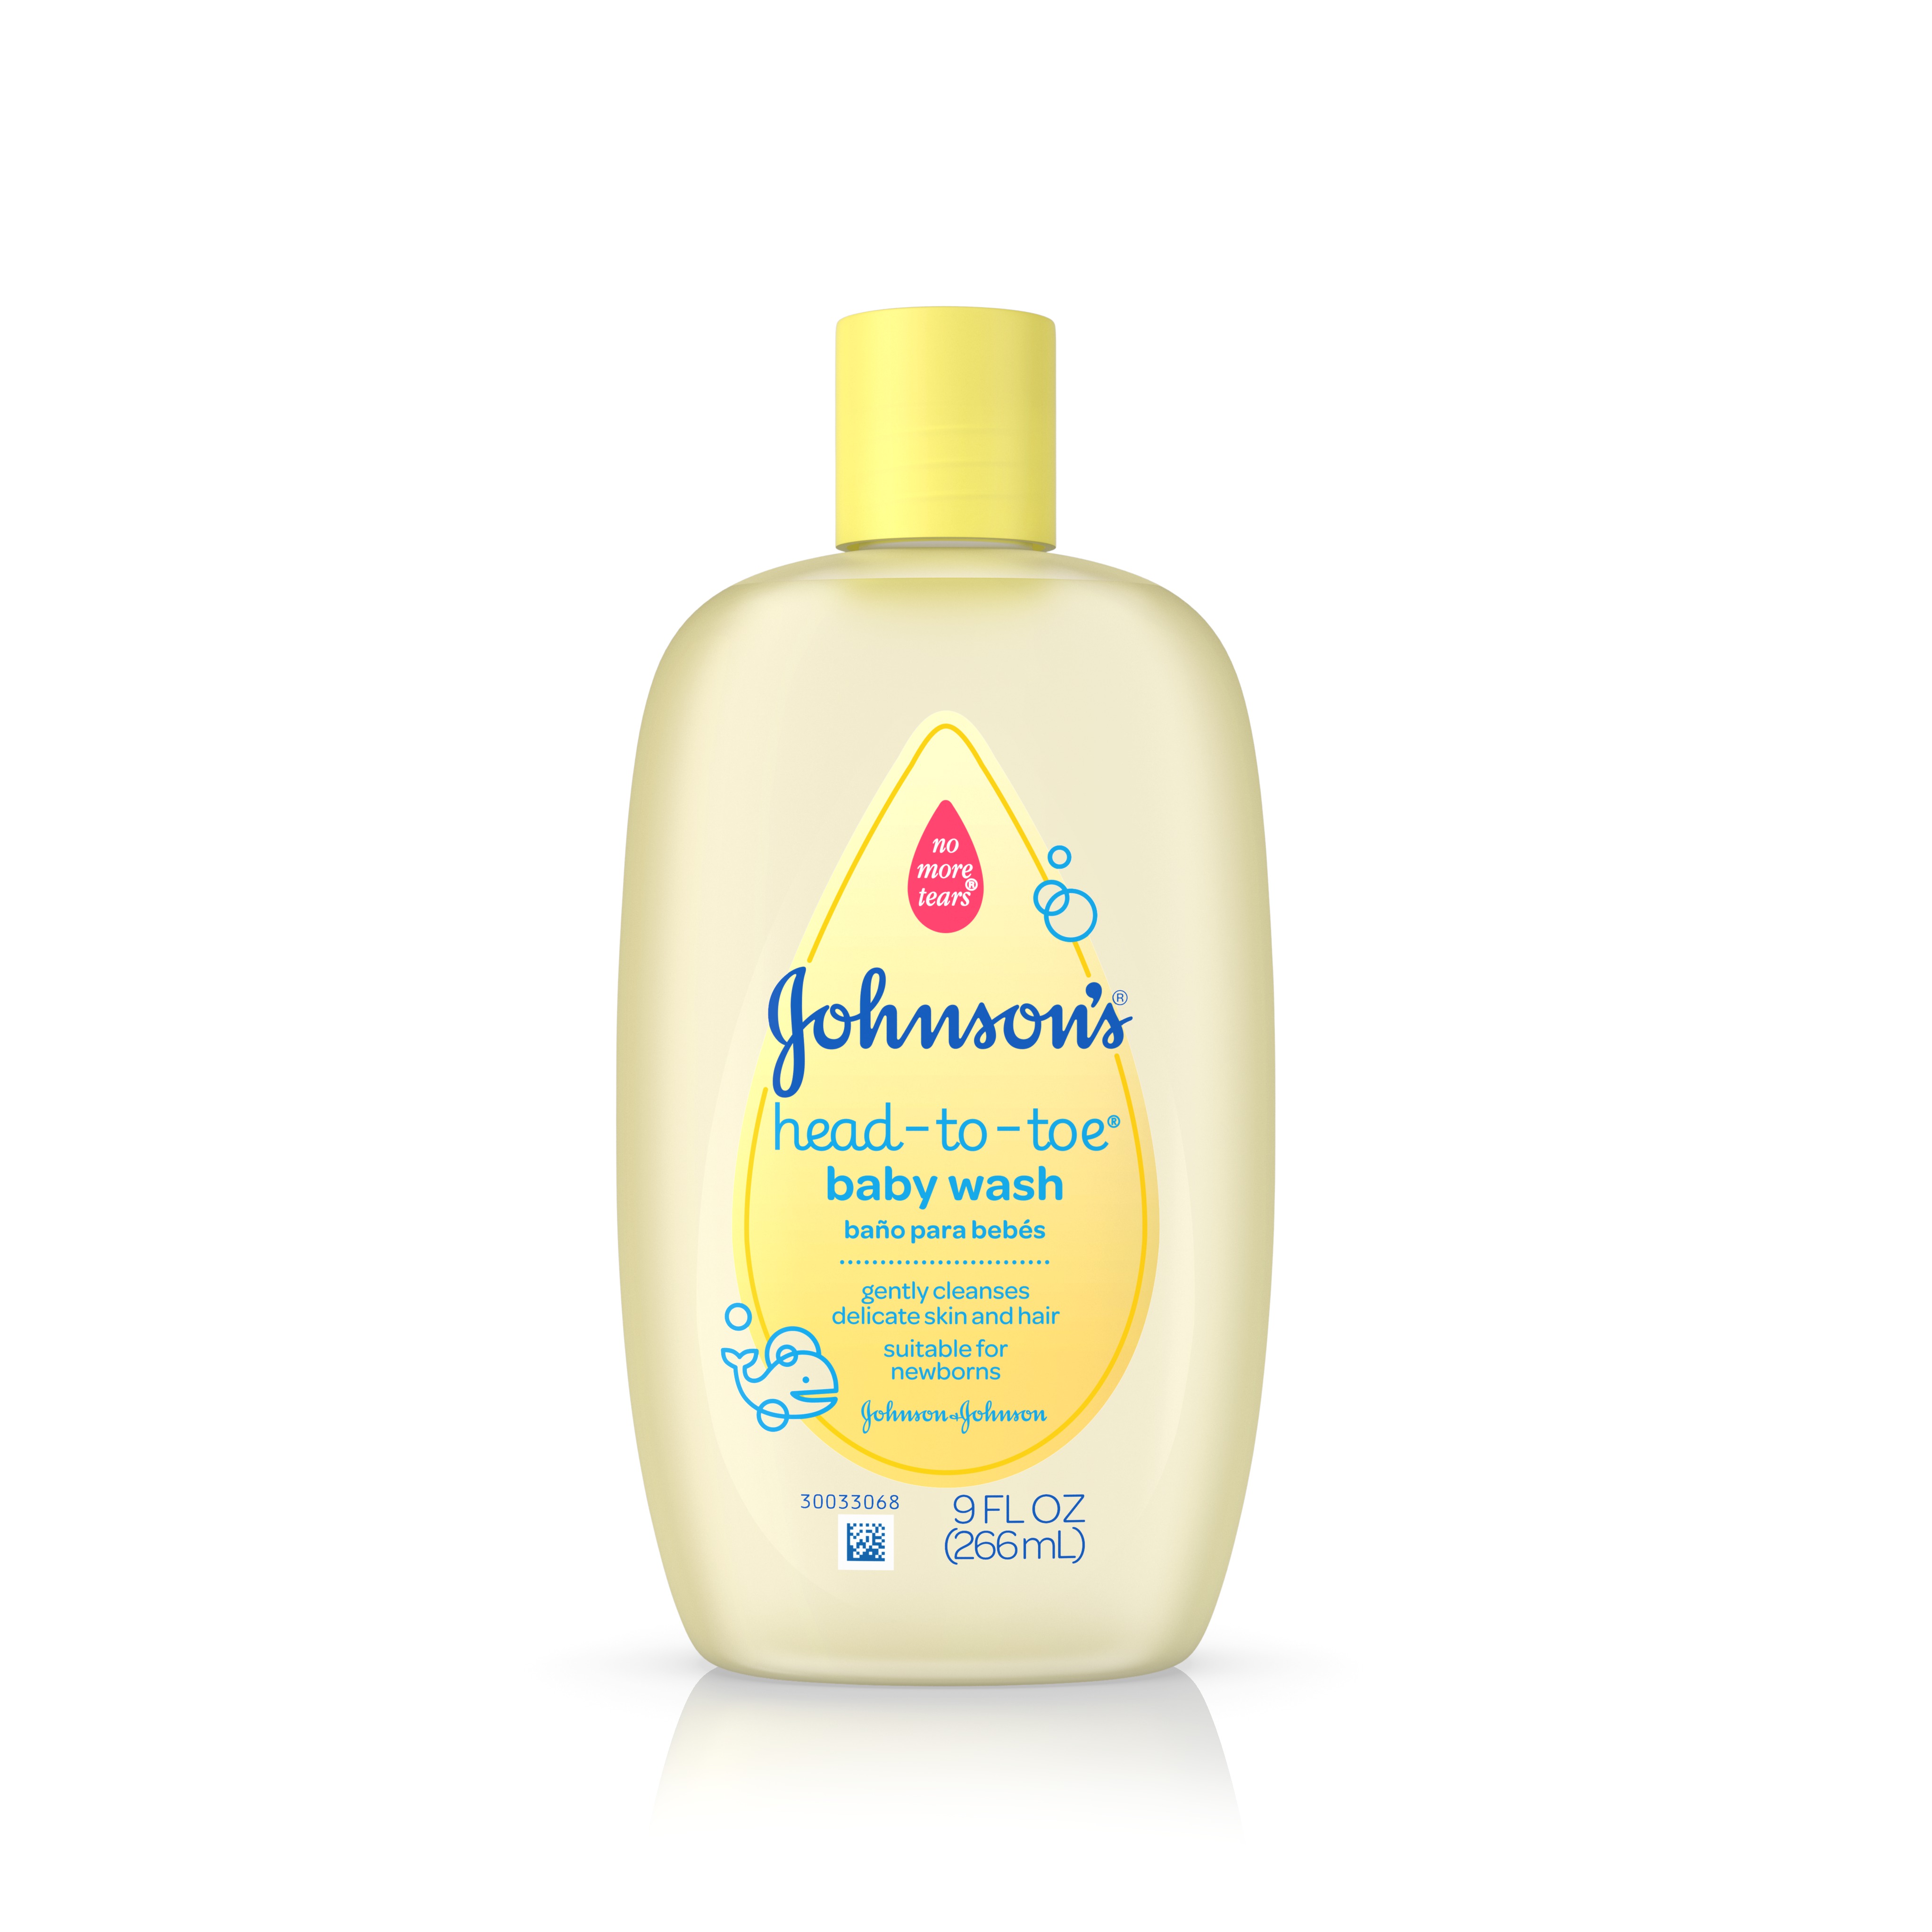 Johnson's Head-To-Toe Baby Wash For Gentle Cleansing, 9 Fl. Oz. - image 1 of 6